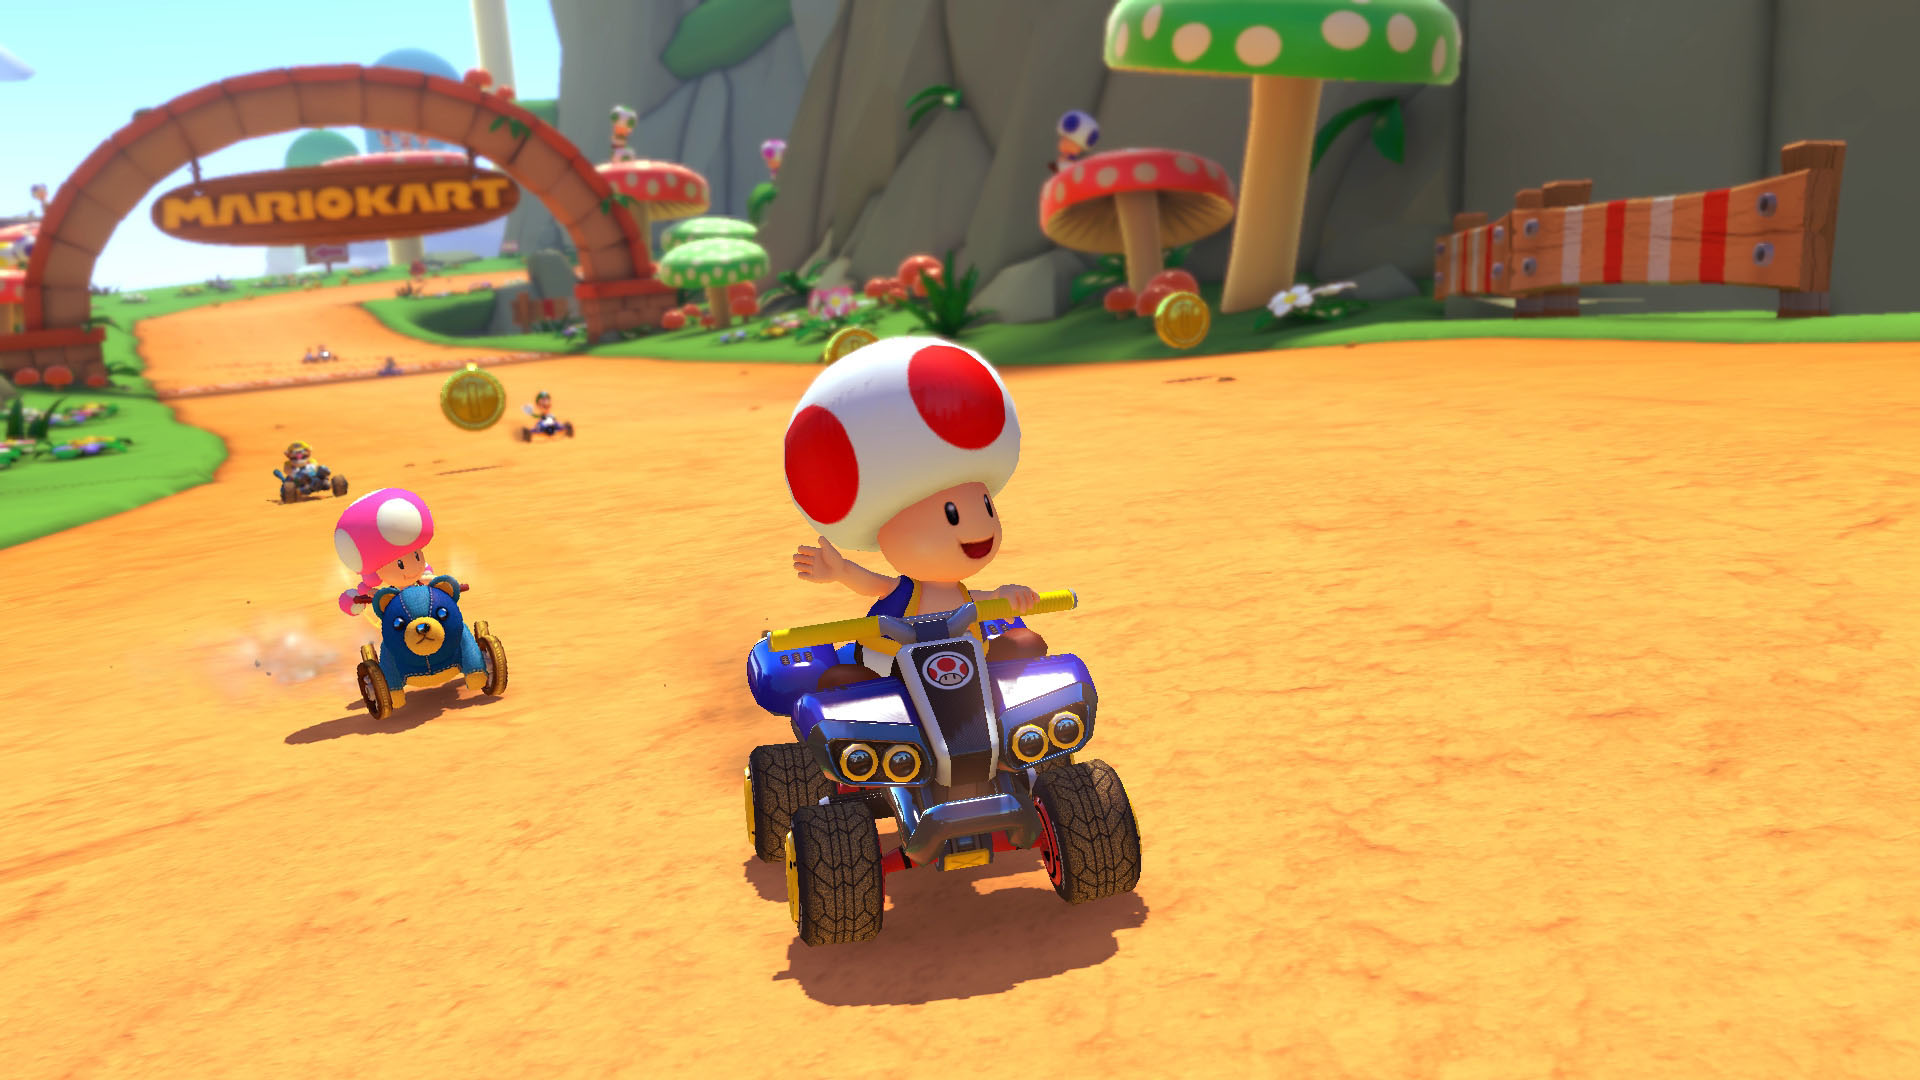 Mario Kart 8 Deluxe Wave 4 date and full track listing